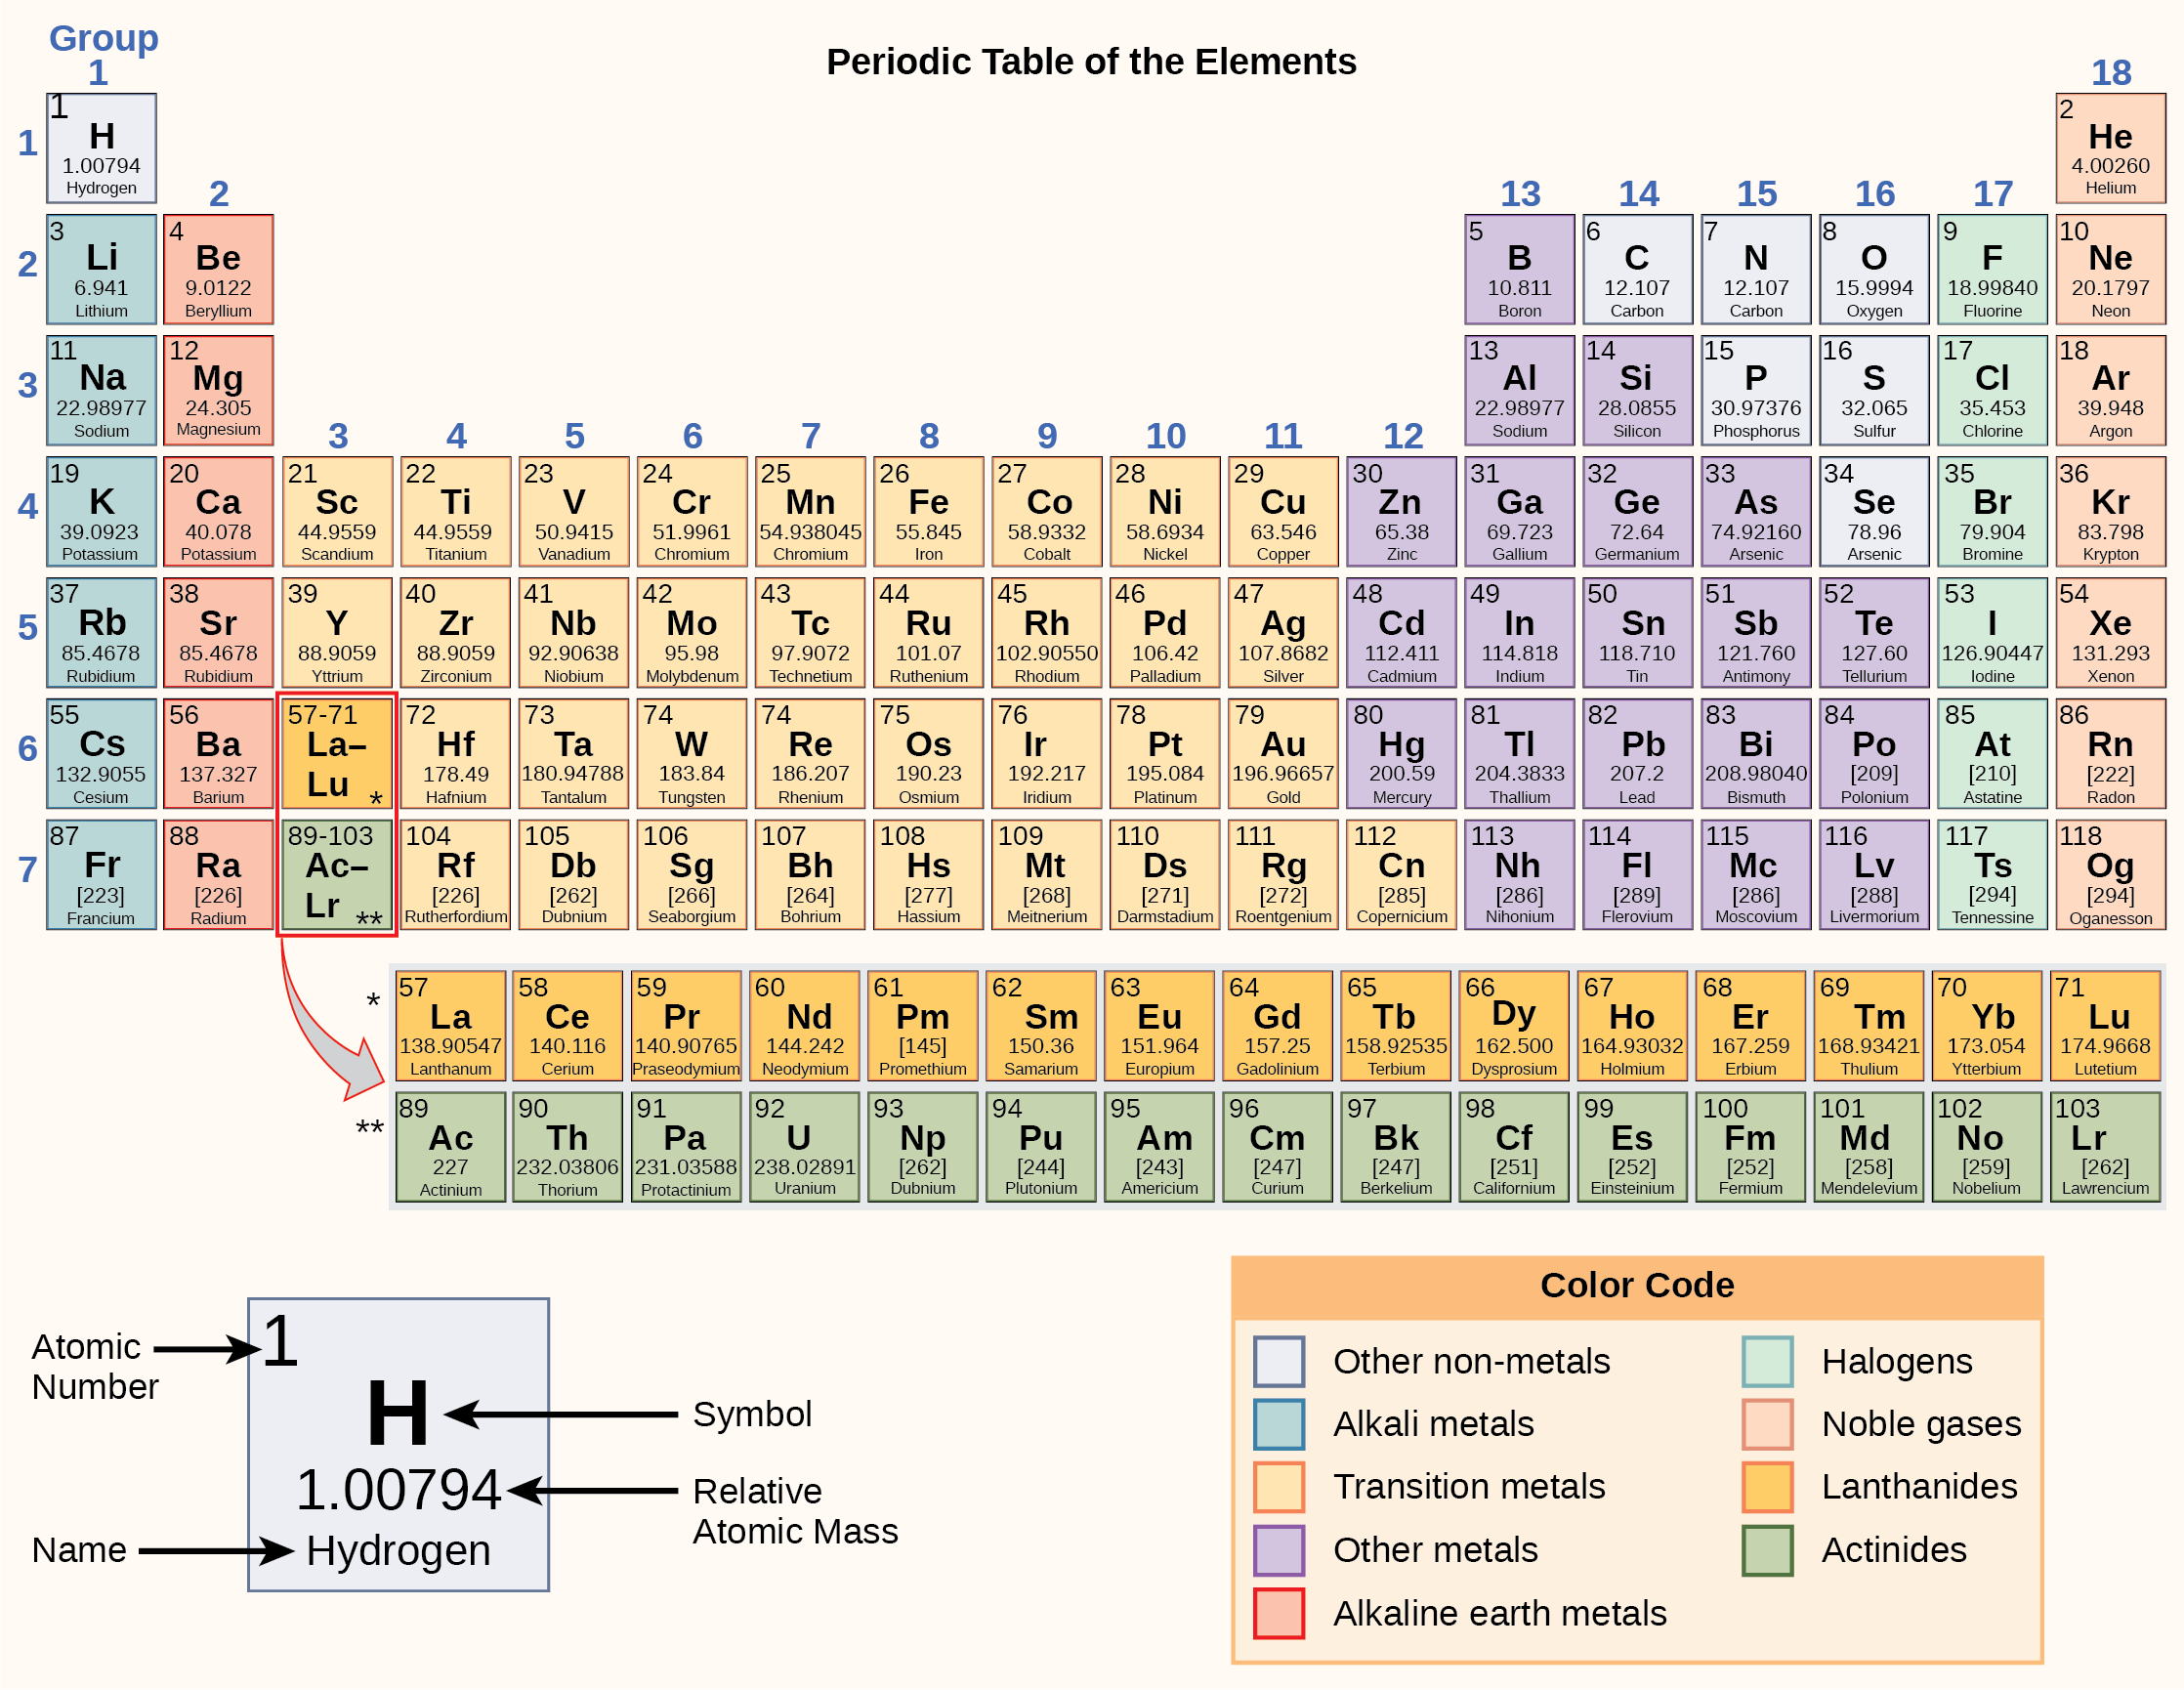 The periodic table consists of eighteen groups and seven periods. Two additional rows of elements, known as the lanthanides and actinides, are placed beneath the main table. The lanthanides include elements 57 through 71 and belong in period seven between groups three and four. The actinides include elements 89 through 98 and belong in period eight between the same groups. These elements are placed separately to make the table more compact. For each element, the name, atomic symbol, atomic number, and atomic mass are provided. The atomic number is a whole number that represents the number of protons. The atomic mass, which is the average mass of different isotopes, is estimated to two decimal places. For example, hydrogen has the atomic symbol H, the atomic number 1, and an atomic mass of 1.01. The atomic mass is always larger that the atomic number. For most small elements, the atomic mass is approximately double the atomic number as the number of protons and neutrons is about equal. The elements are divided into three categories: metals, nonmetals and metalloids. These form a diagonal line from period two, group thirteen to period seven, group sixteen. All elements to the left of the metalloids are metals, and all elements to the right are nonmetals.